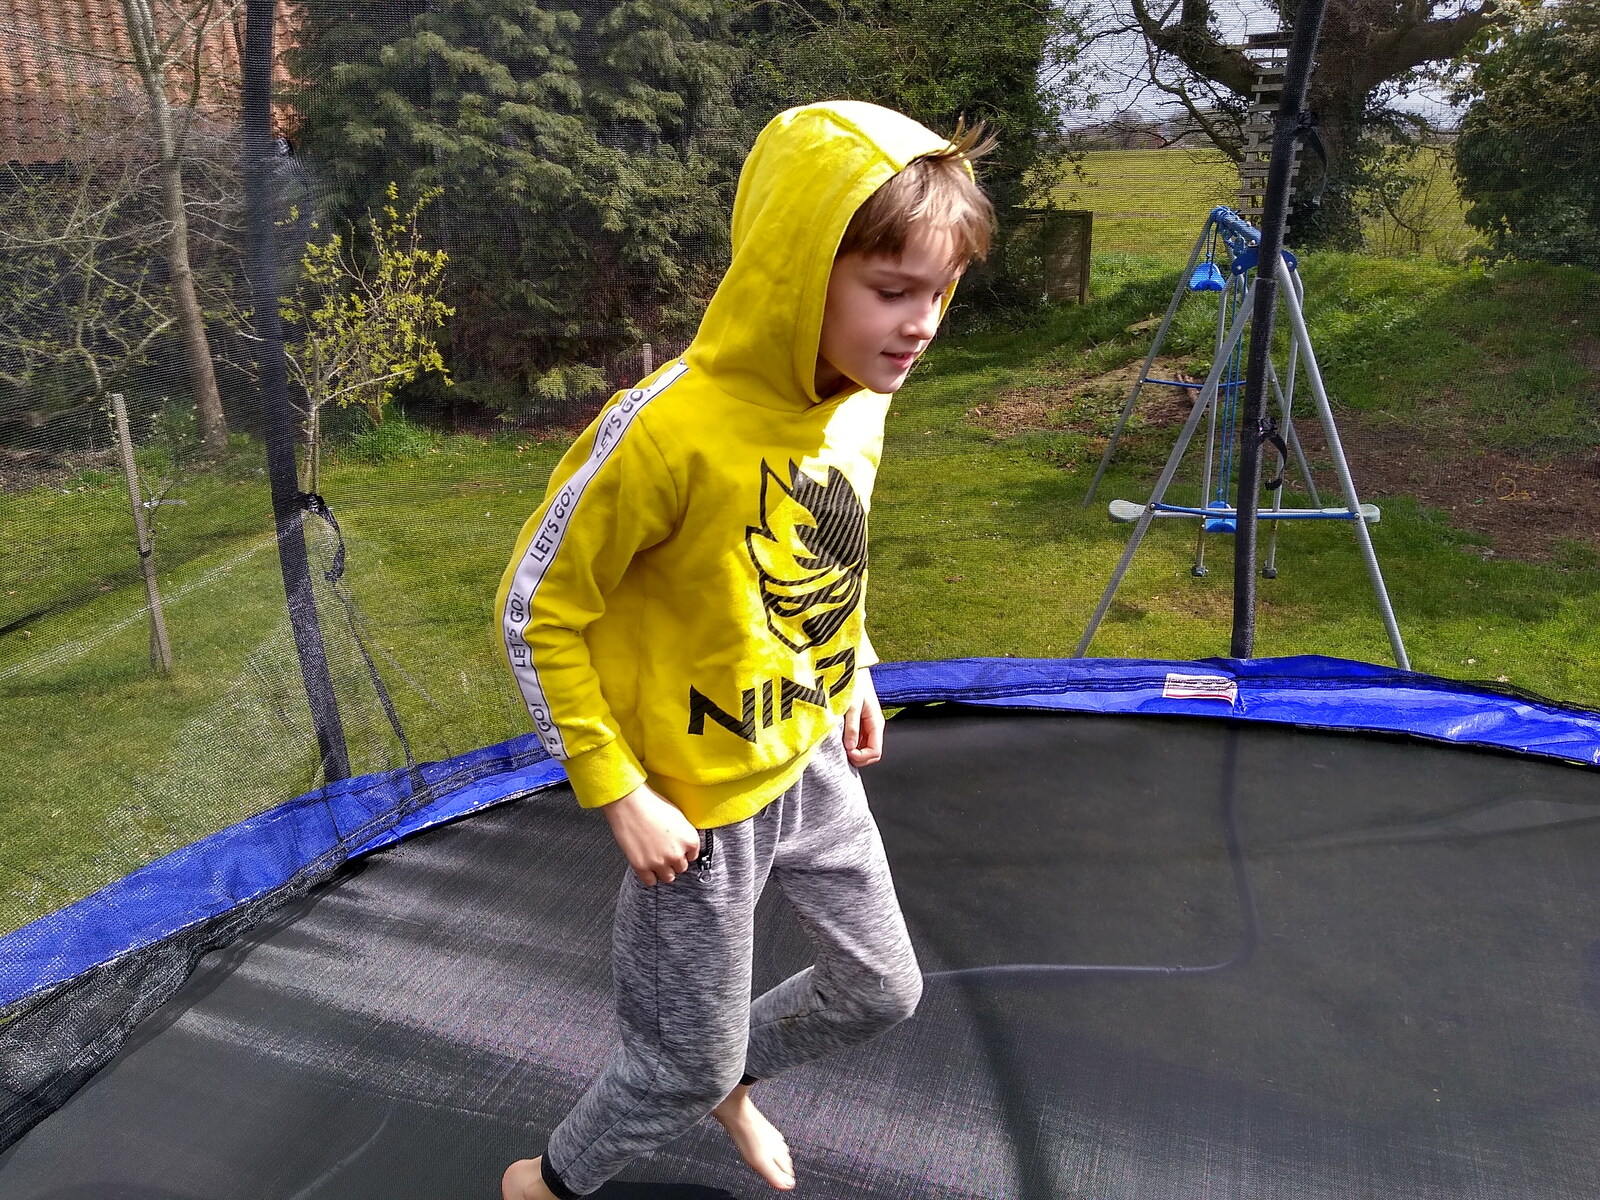 Harry runs around on the trampoline from A Cameraphone Roundup, Brome and Eye, Suffolk - 12th April 2021